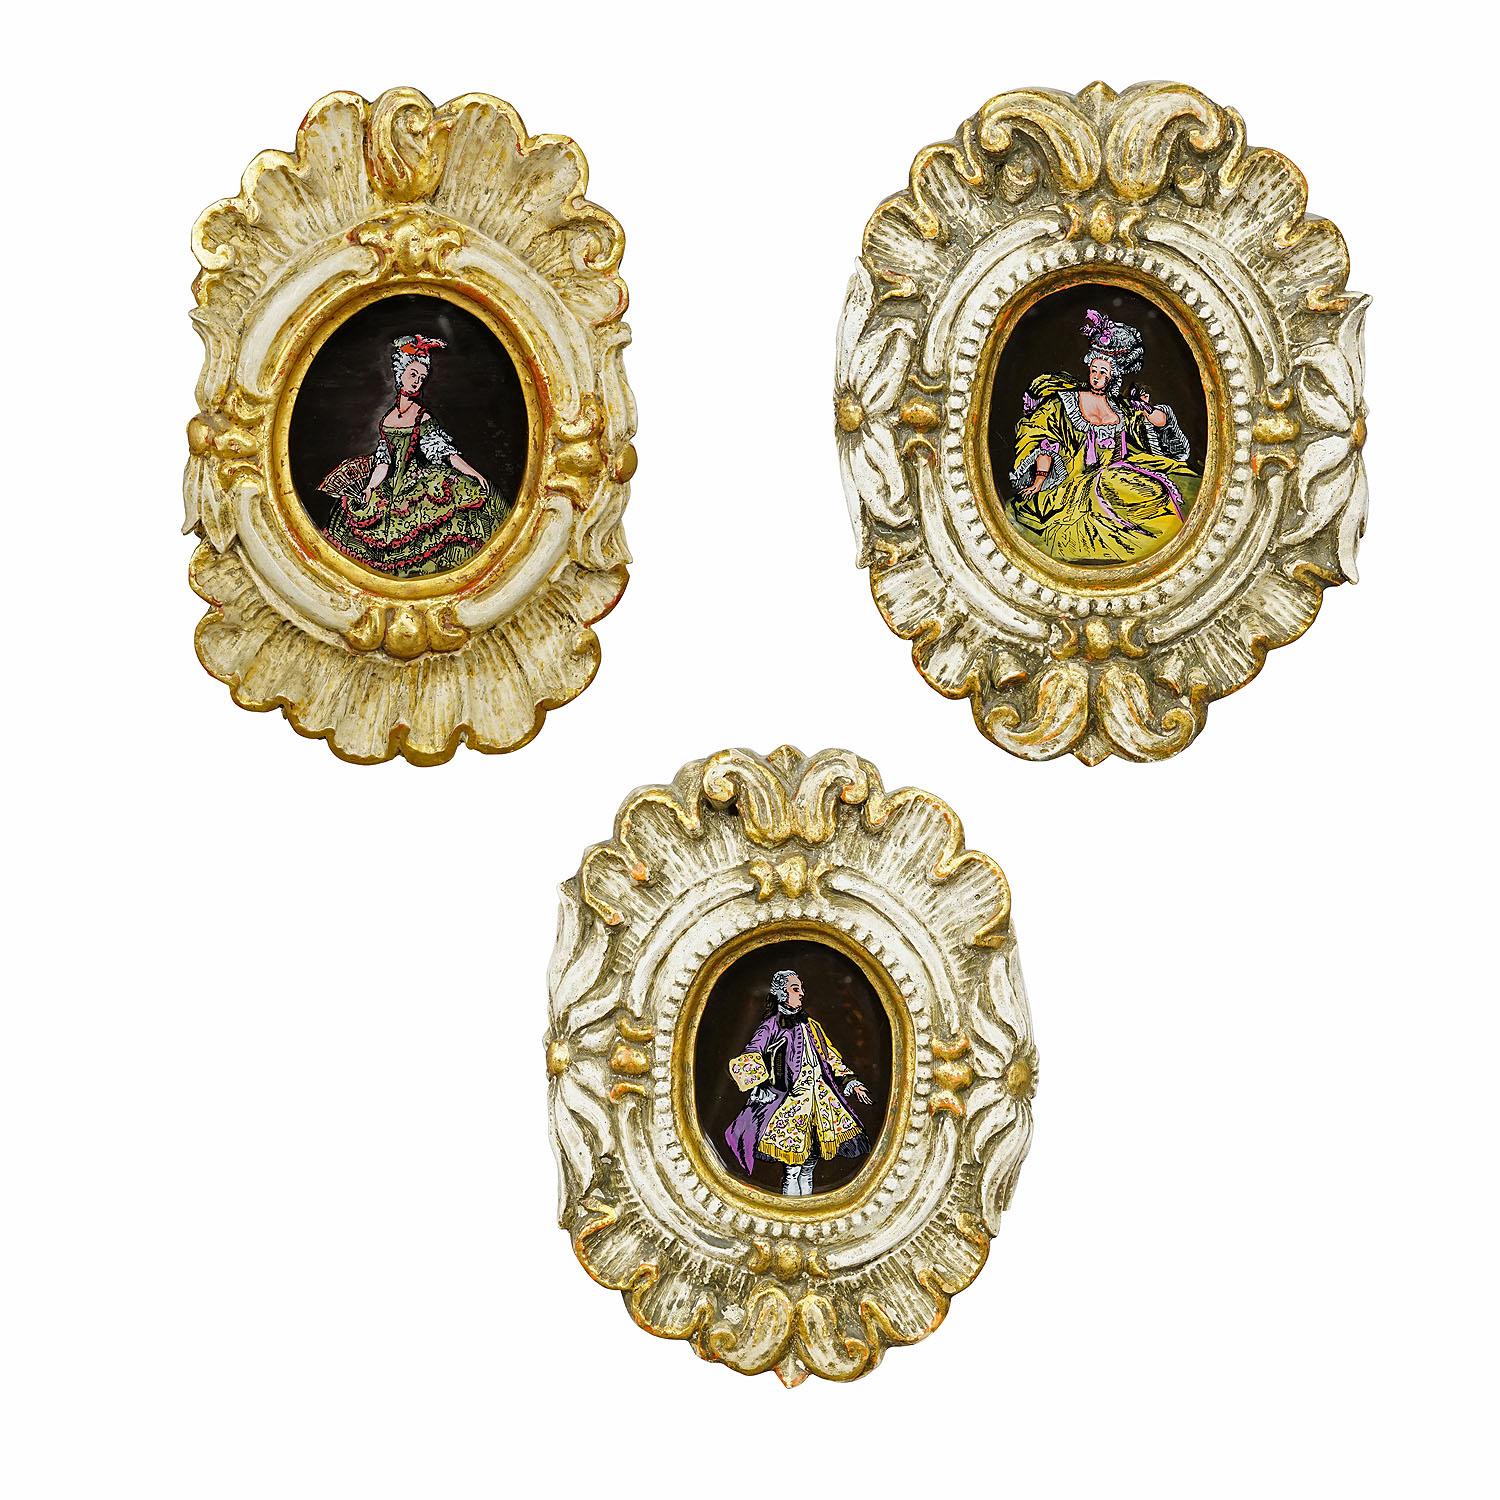 Set of Three Vintage Paintings with People in Rococo Costumes

A set of three paintings depicting two noble ladies and a noble man in Rococo costumes. Handpainted in Germany ca. 1950s and framed behind glass in wooden carved and gilded